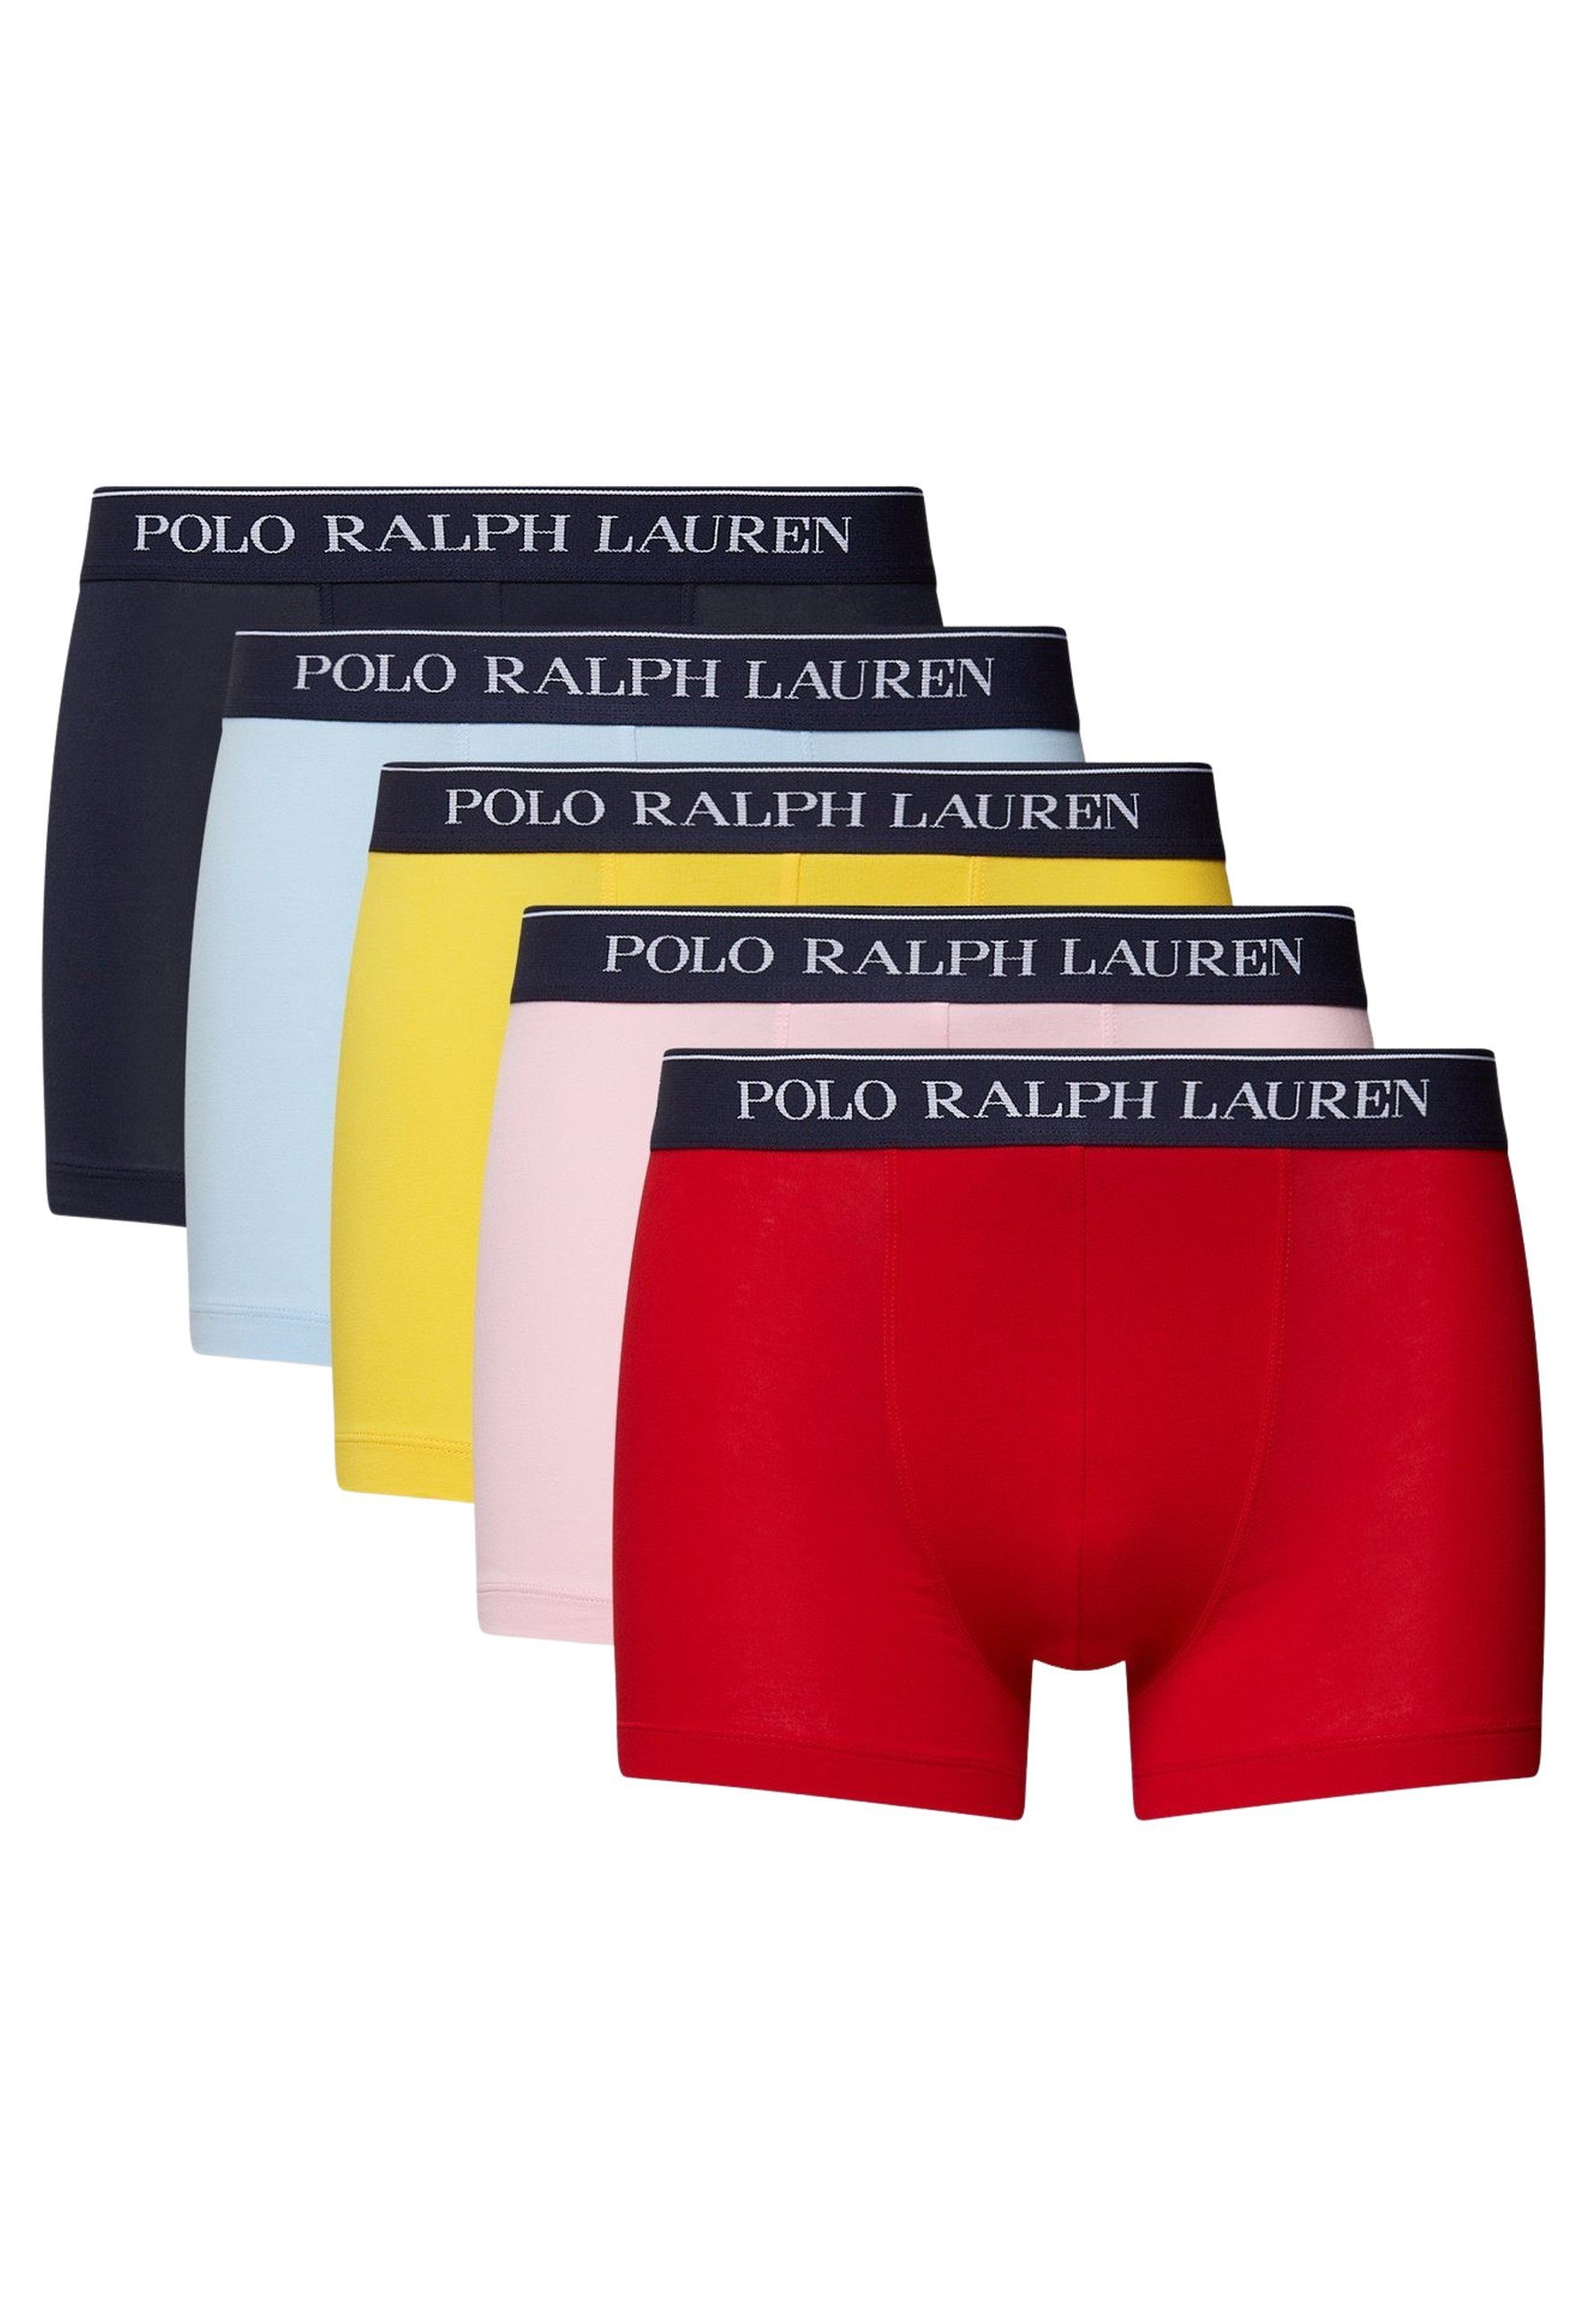 Polo Ralph Lauren Boxershorts Classic (Packung, 5-St., 5er-Pack)